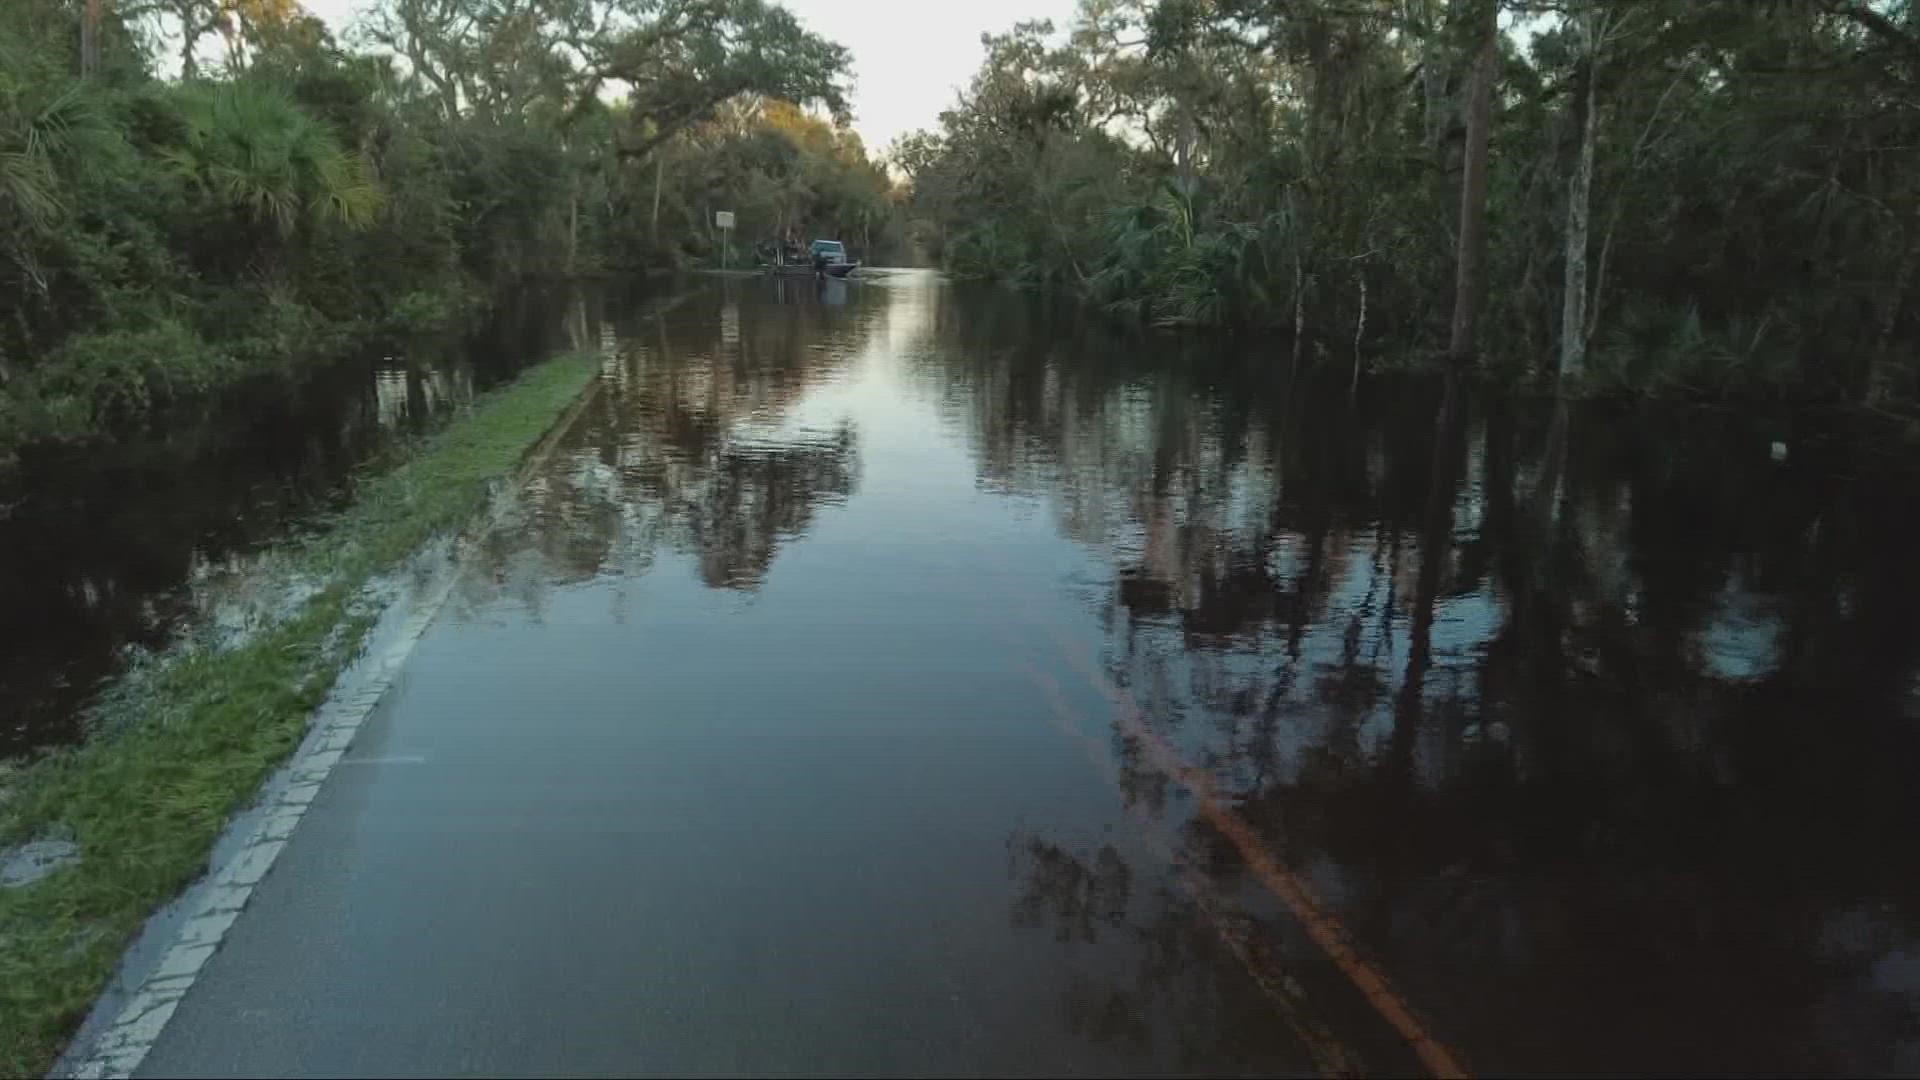 Hurricane Ian: Sarasota County, Florida dealt with rising flood waters that caused more worries as Florida deals with hurricane aftermath.